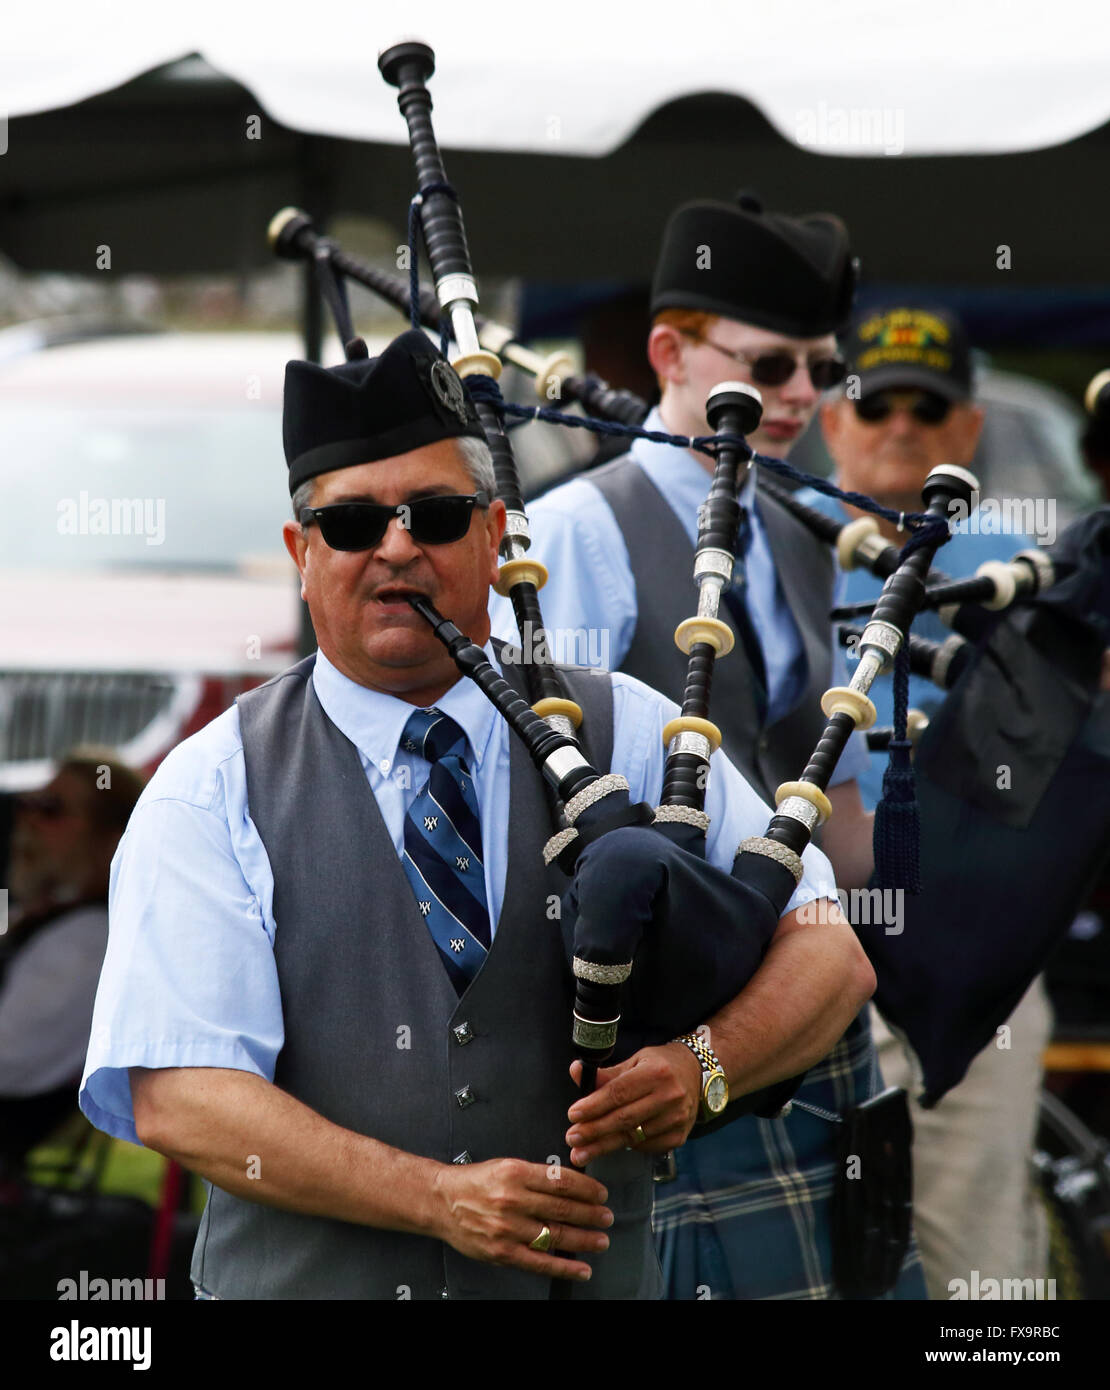 A bagpiper plays at the Inaugural Highland Games in Myrtle Beach South Carolina. Photographed March 19, 2016 Stock Photo